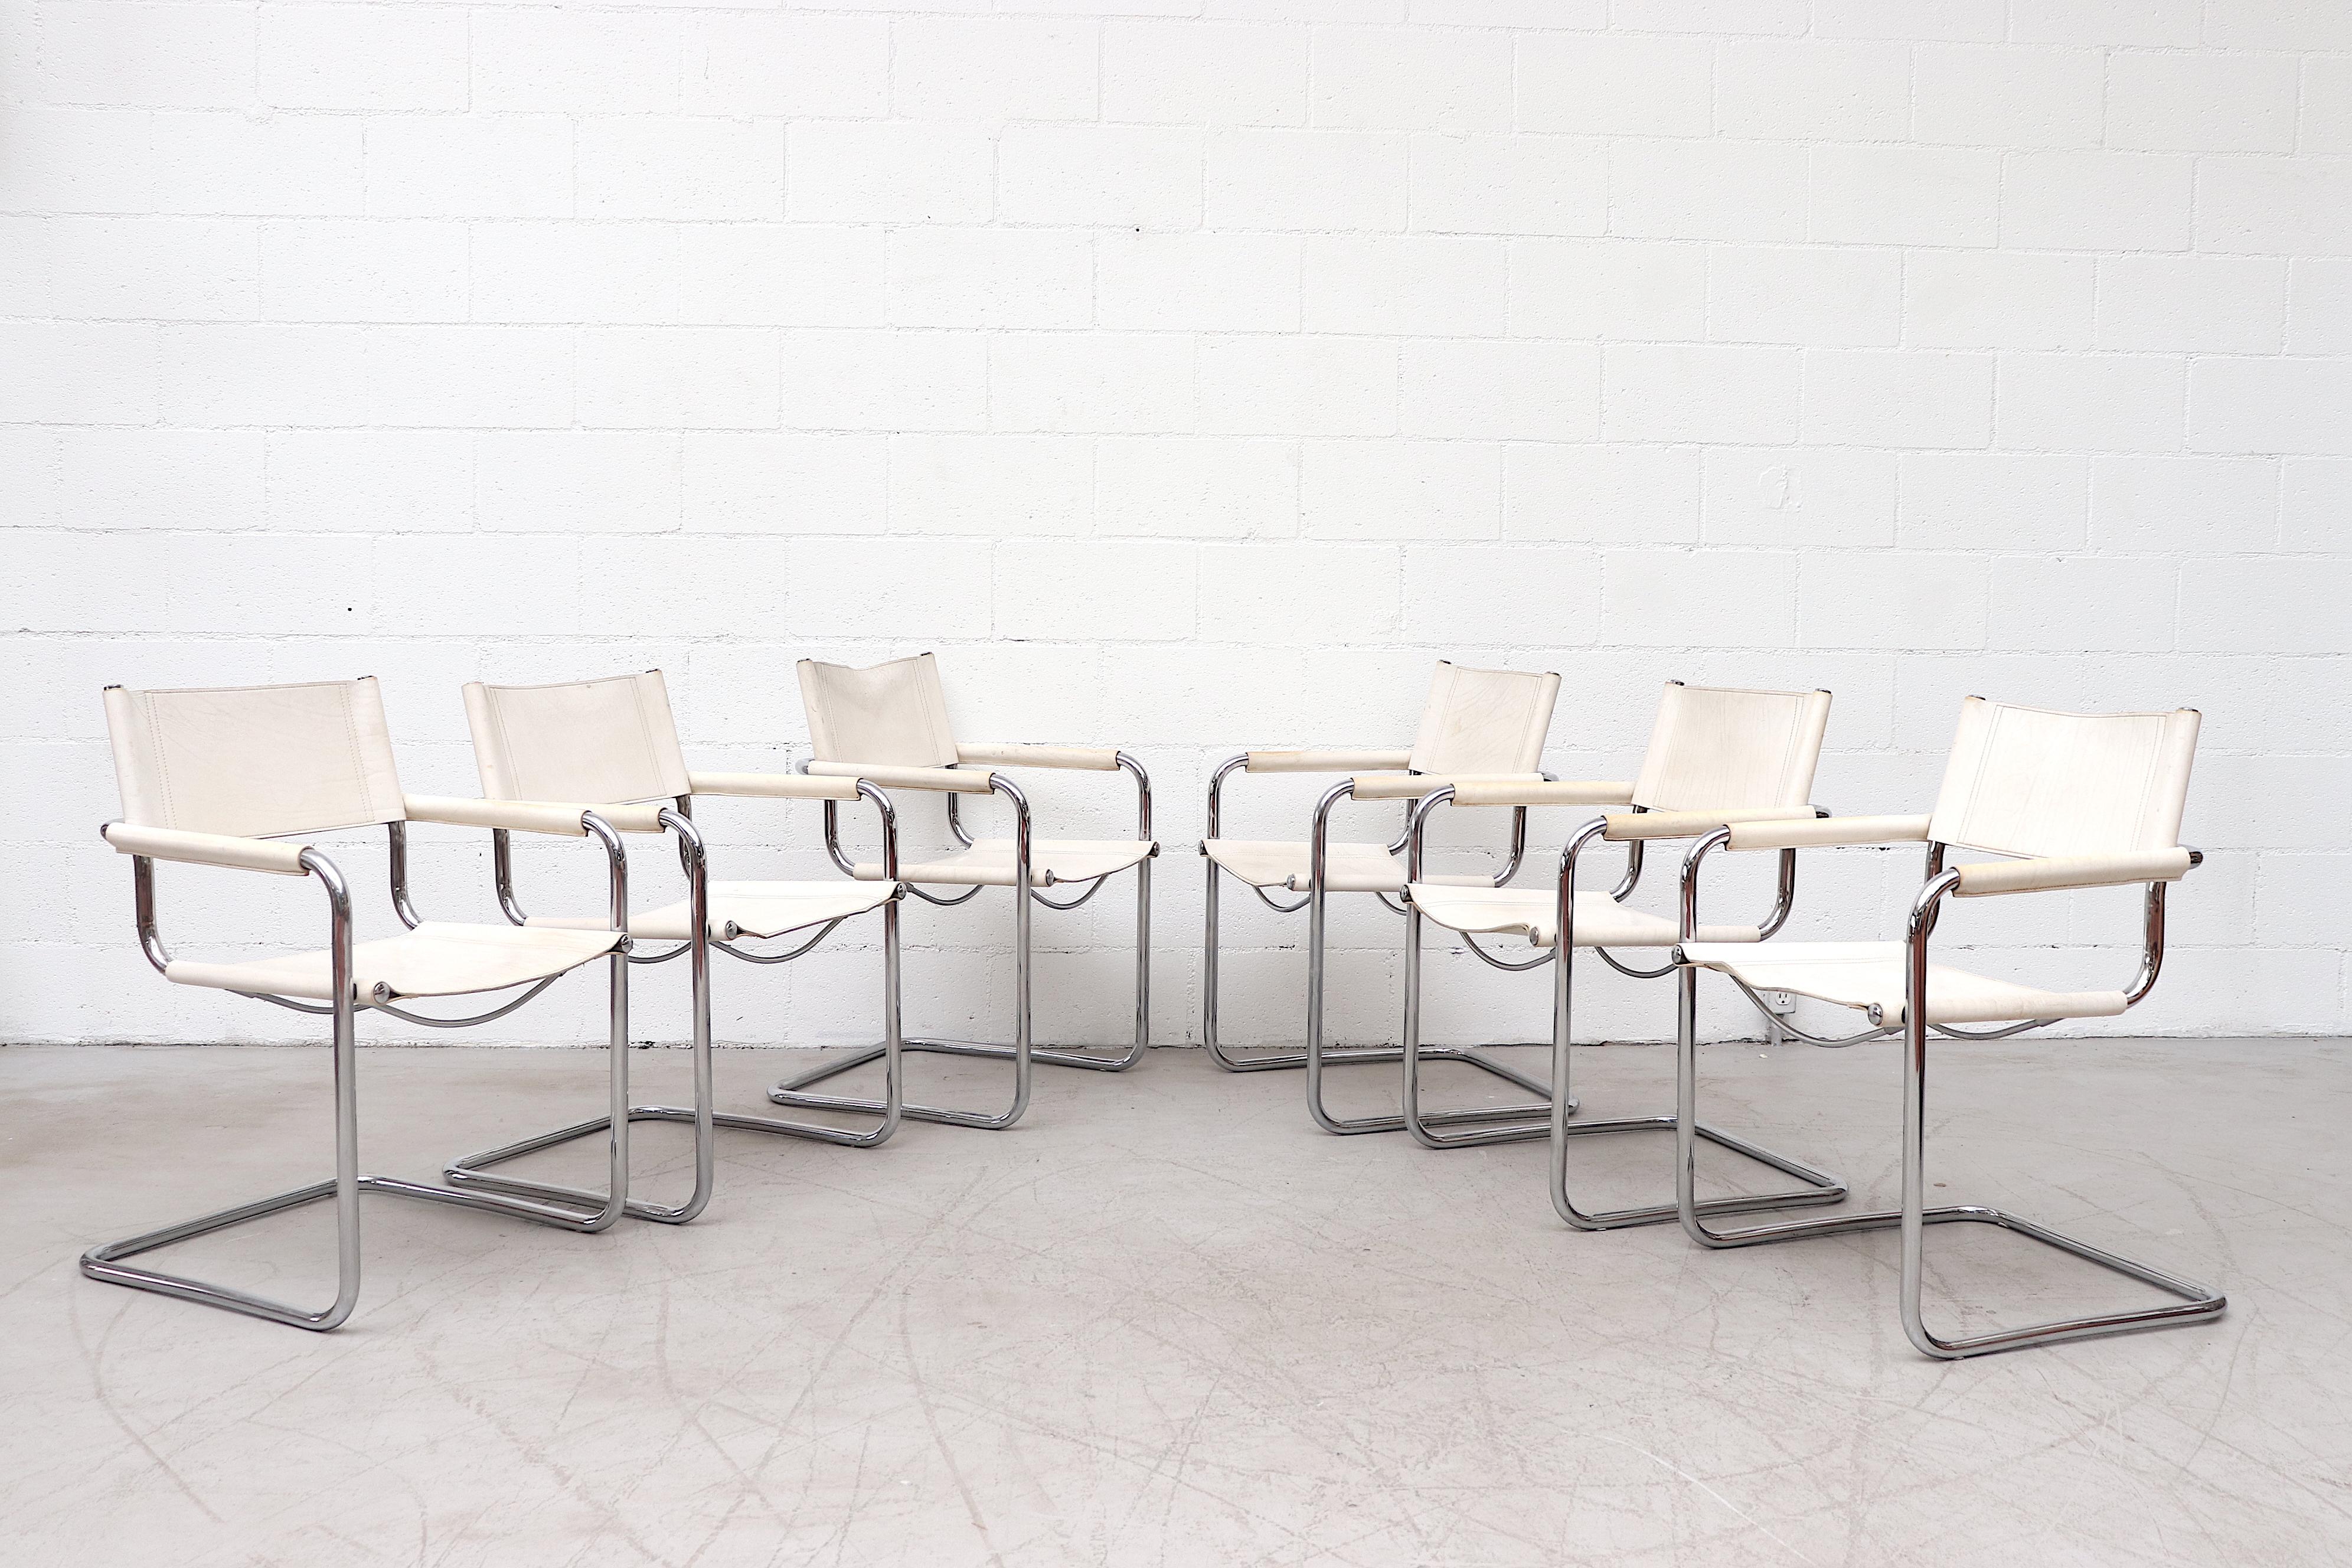 Gorgeous white leather Matteo Grassi style cantilevered armchairs with tubular chrome frame and leather wrapped arm rests. In original condition with visible wear and scratching. Some staining and color variations. Set price.